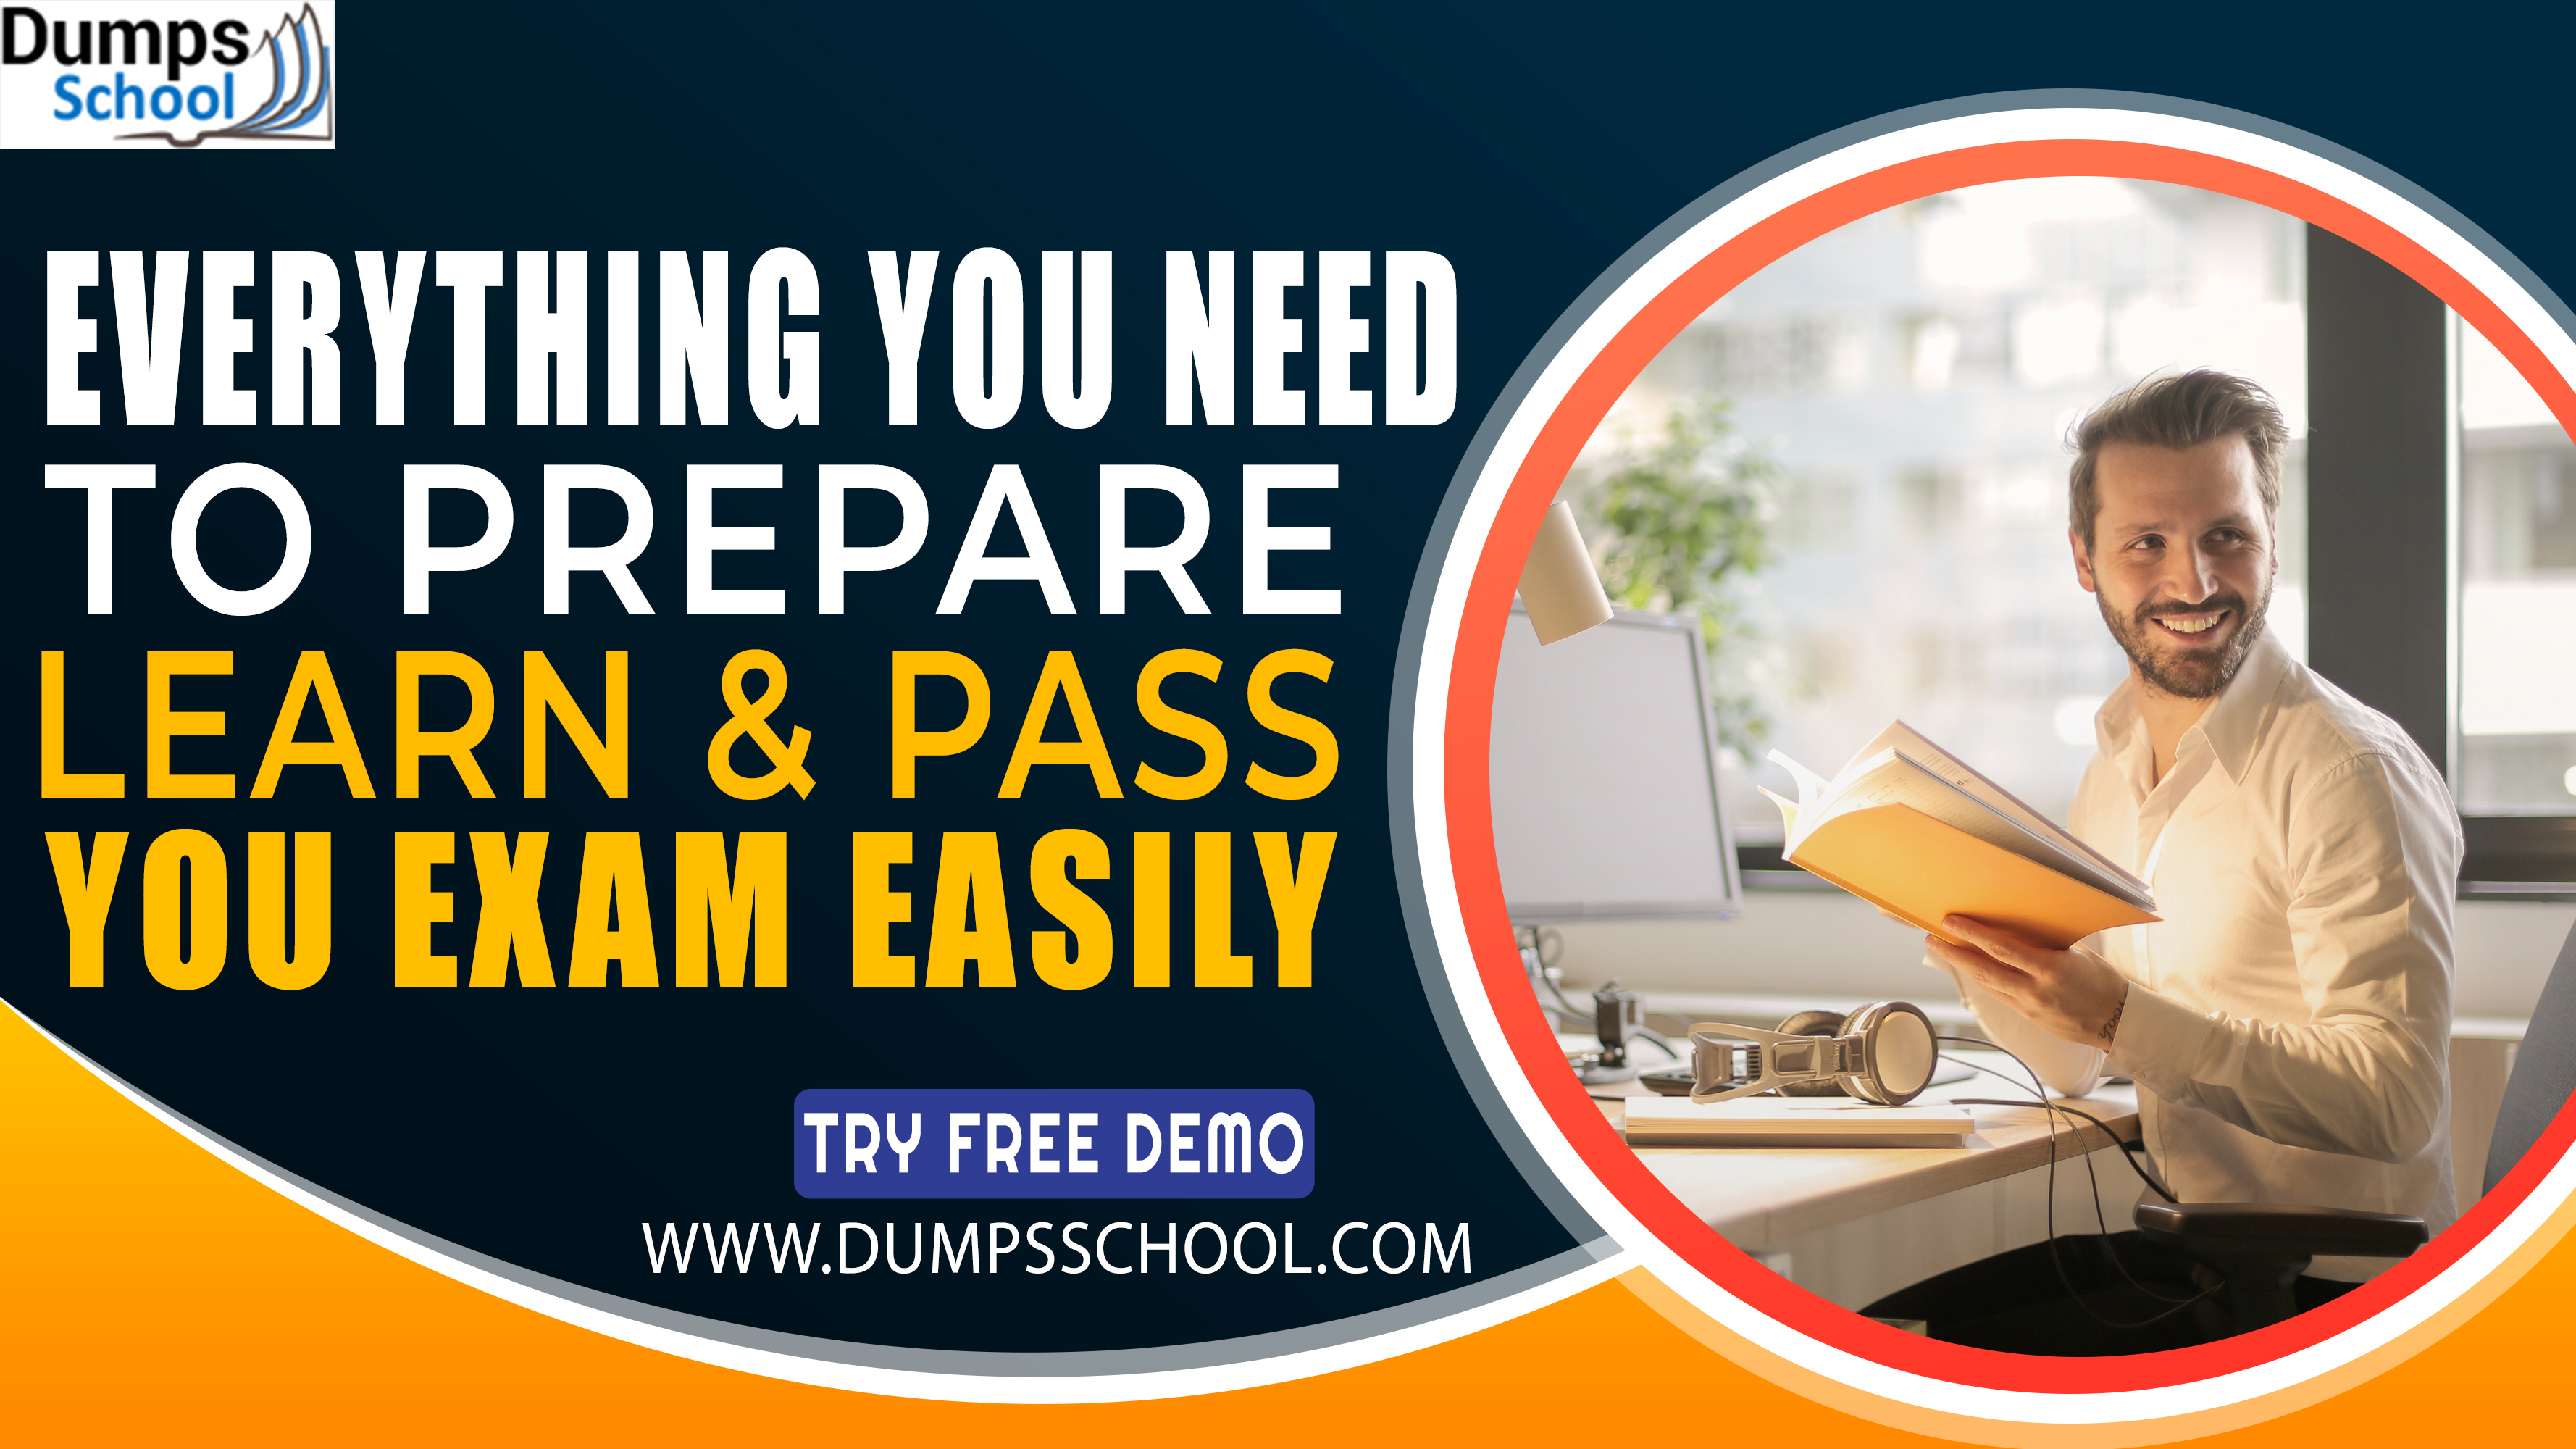 AZ-140 Dumps Assist You in Passing Your Microsoft Exam with Ease